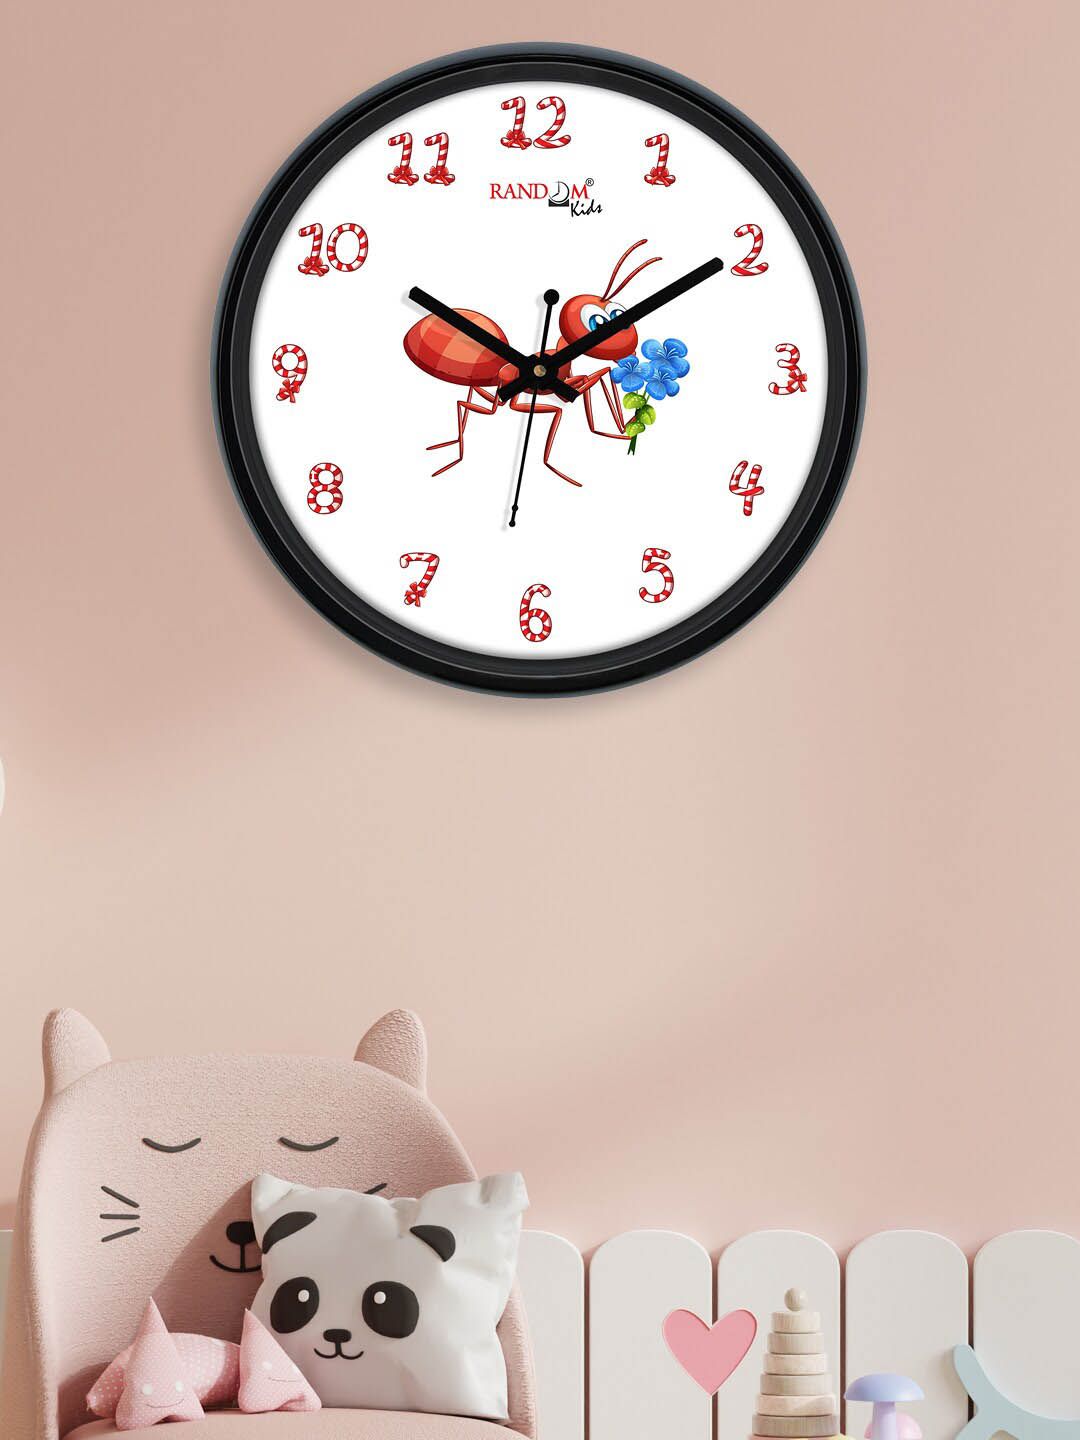 RANDOM White Printed Plastic Wall Clock With Glass 12 Inches Price in India